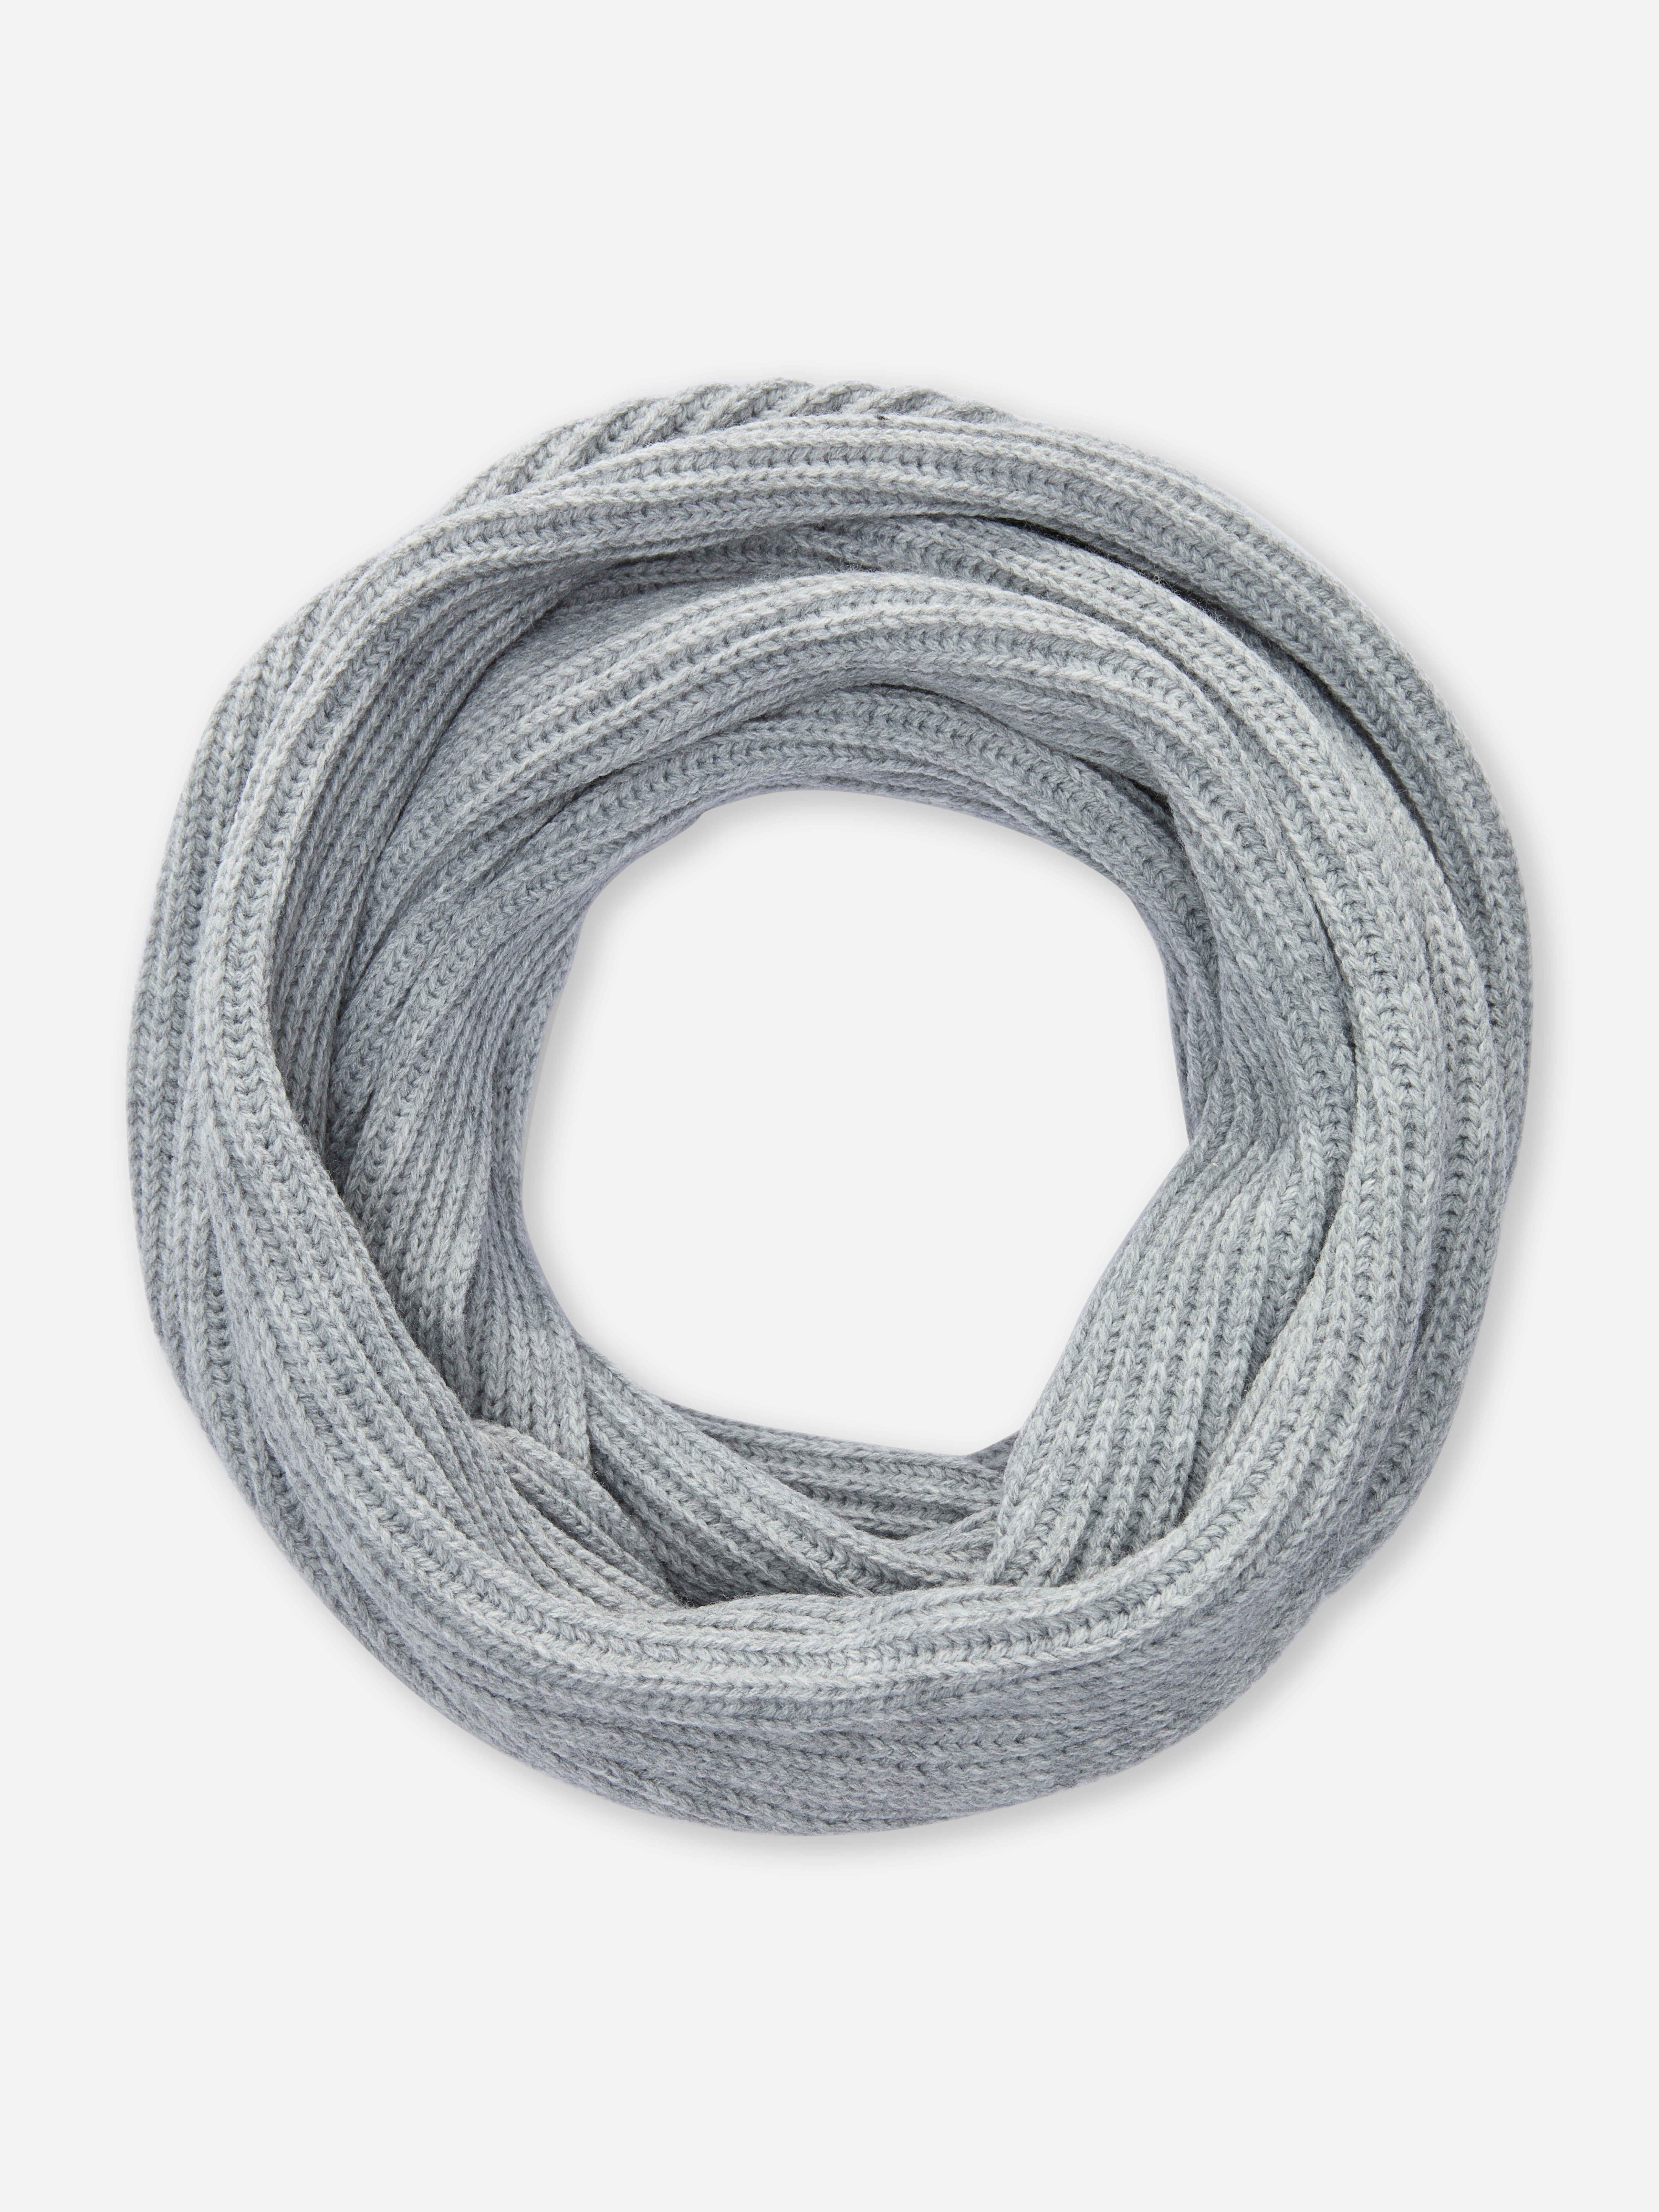 Knitted Snood Scarf Grey